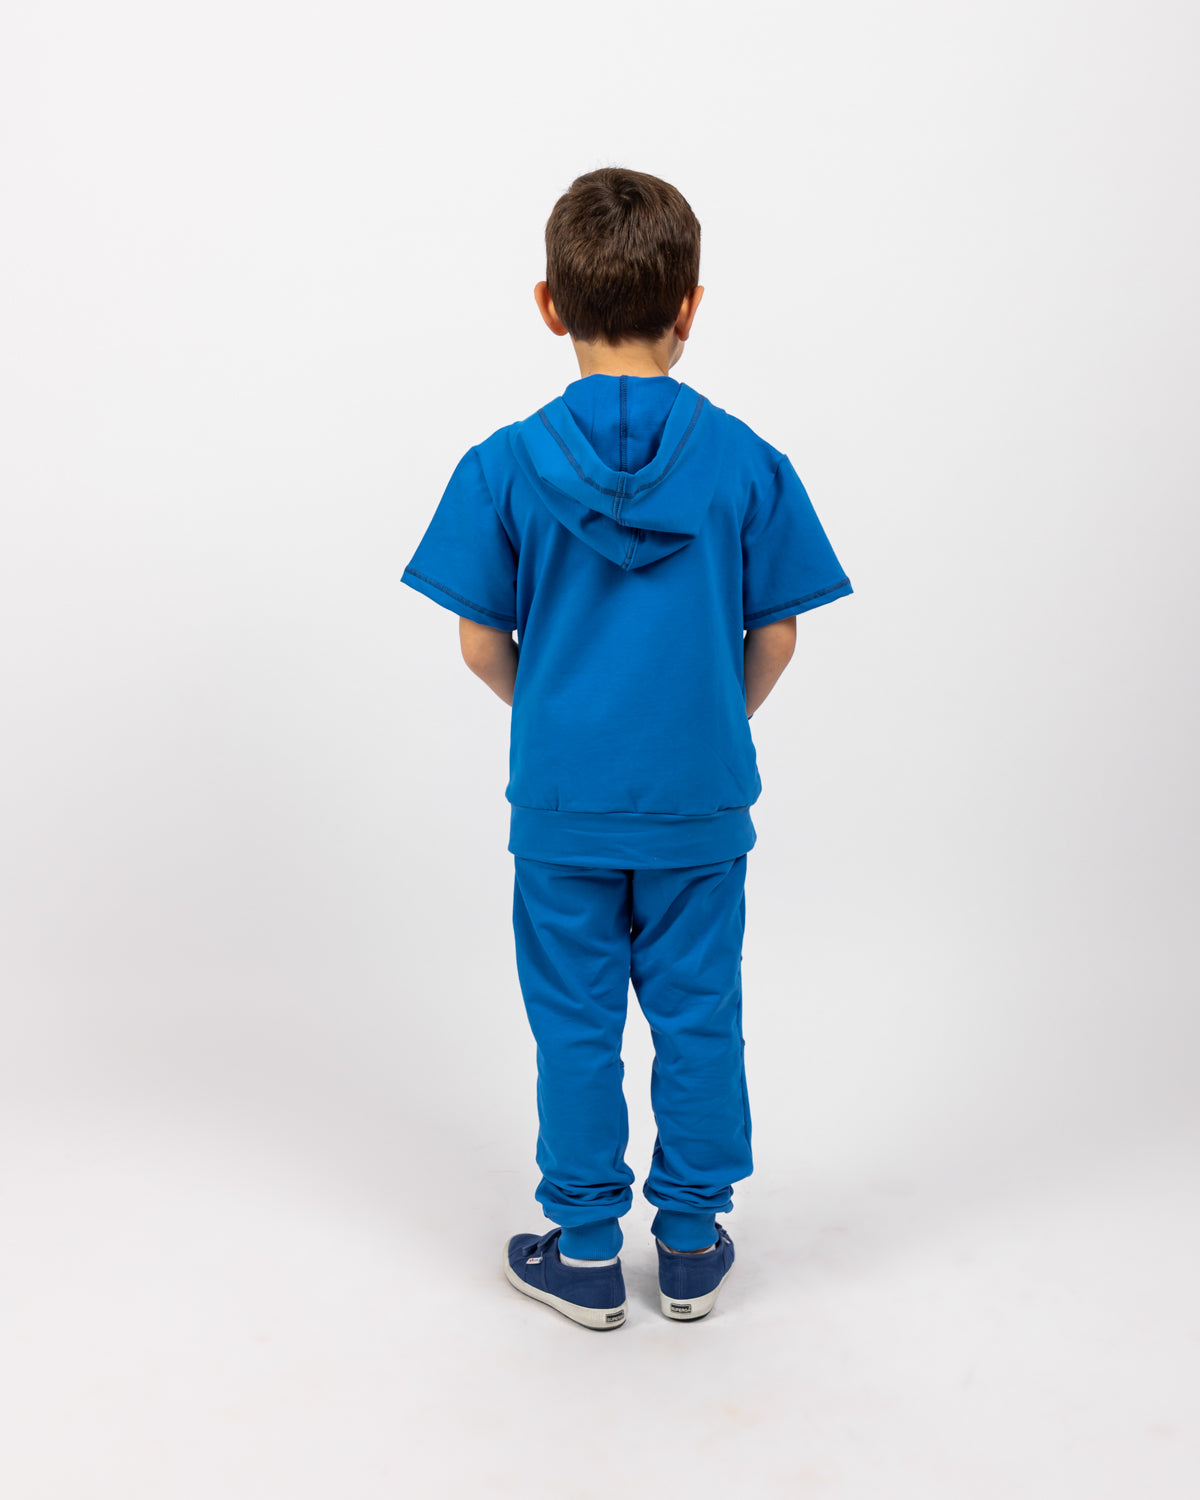 Hooded Sweatshirt with Pockets For Boys - Blue